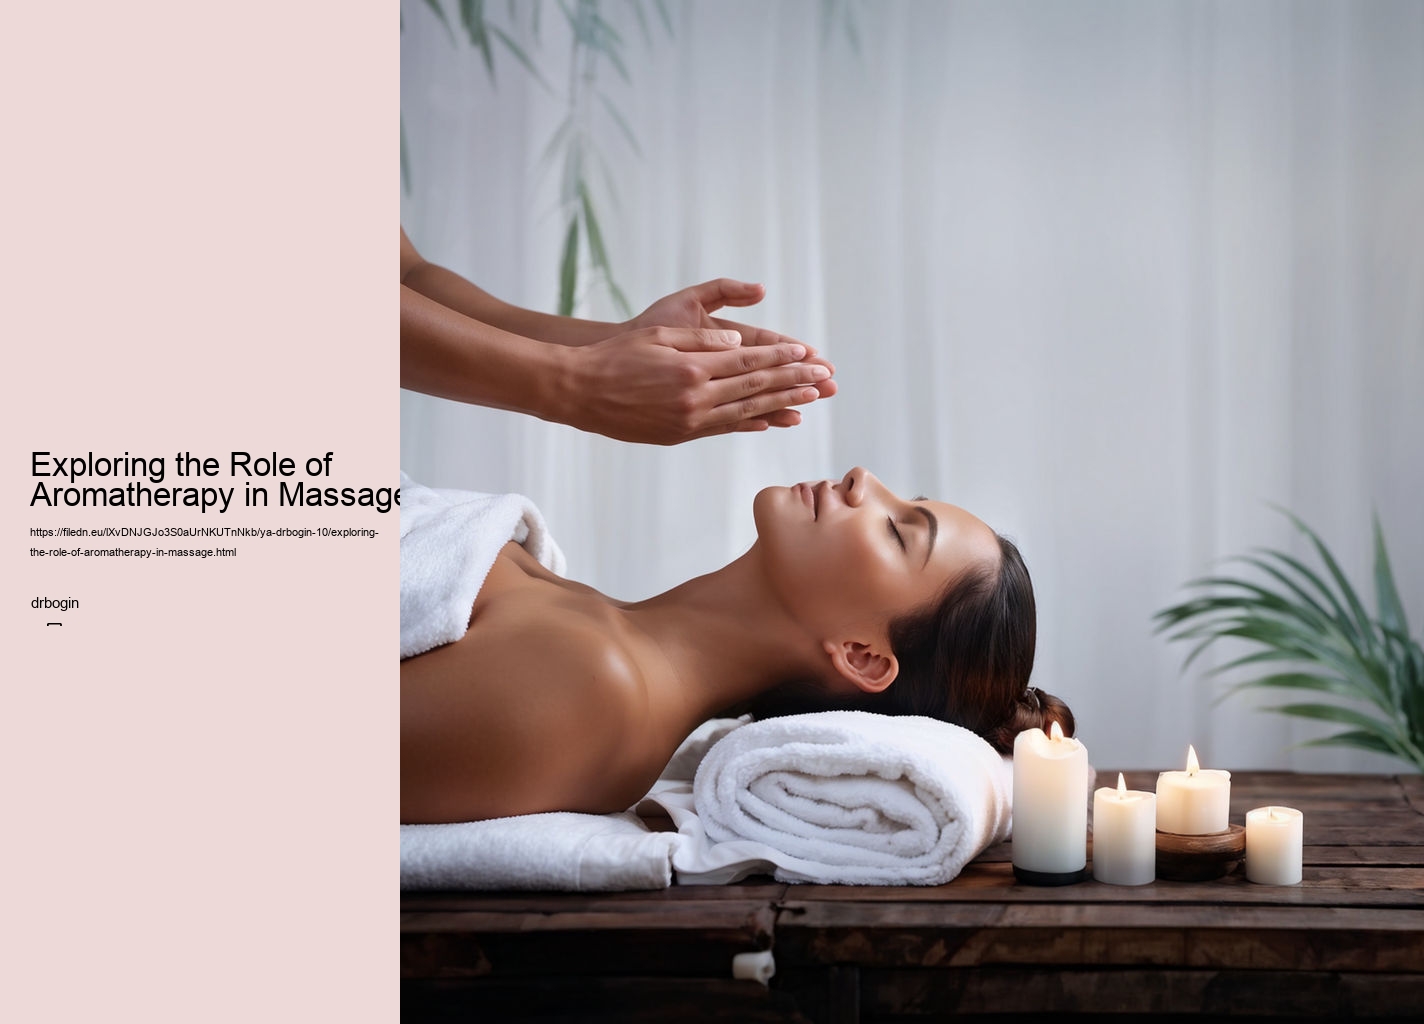 Exploring the Role of Aromatherapy in Massage